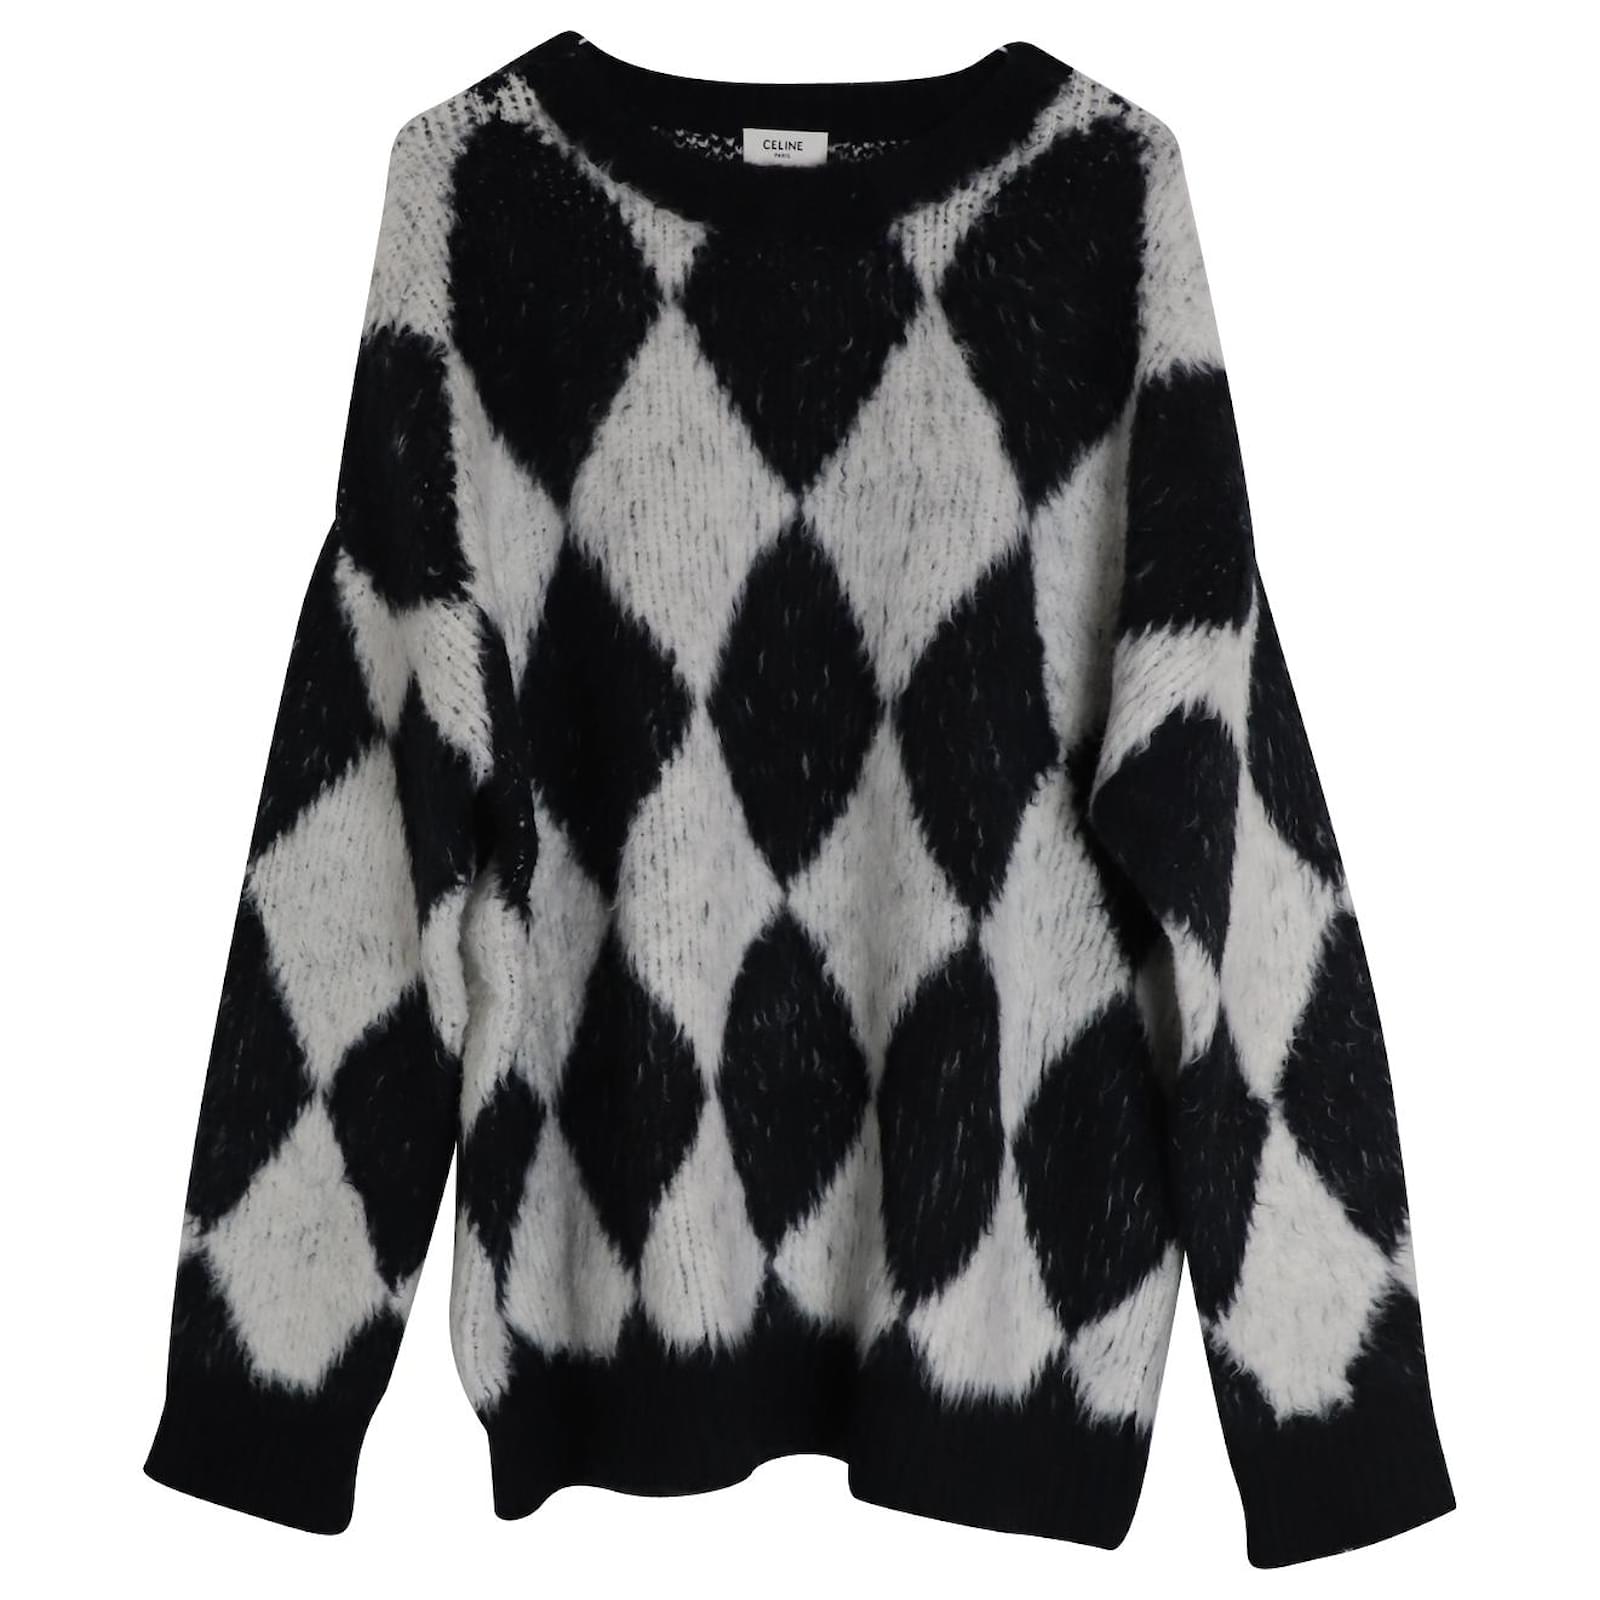 Céline Celine Boxy Surfer Sweater in Black and White Cotton Multiple ...